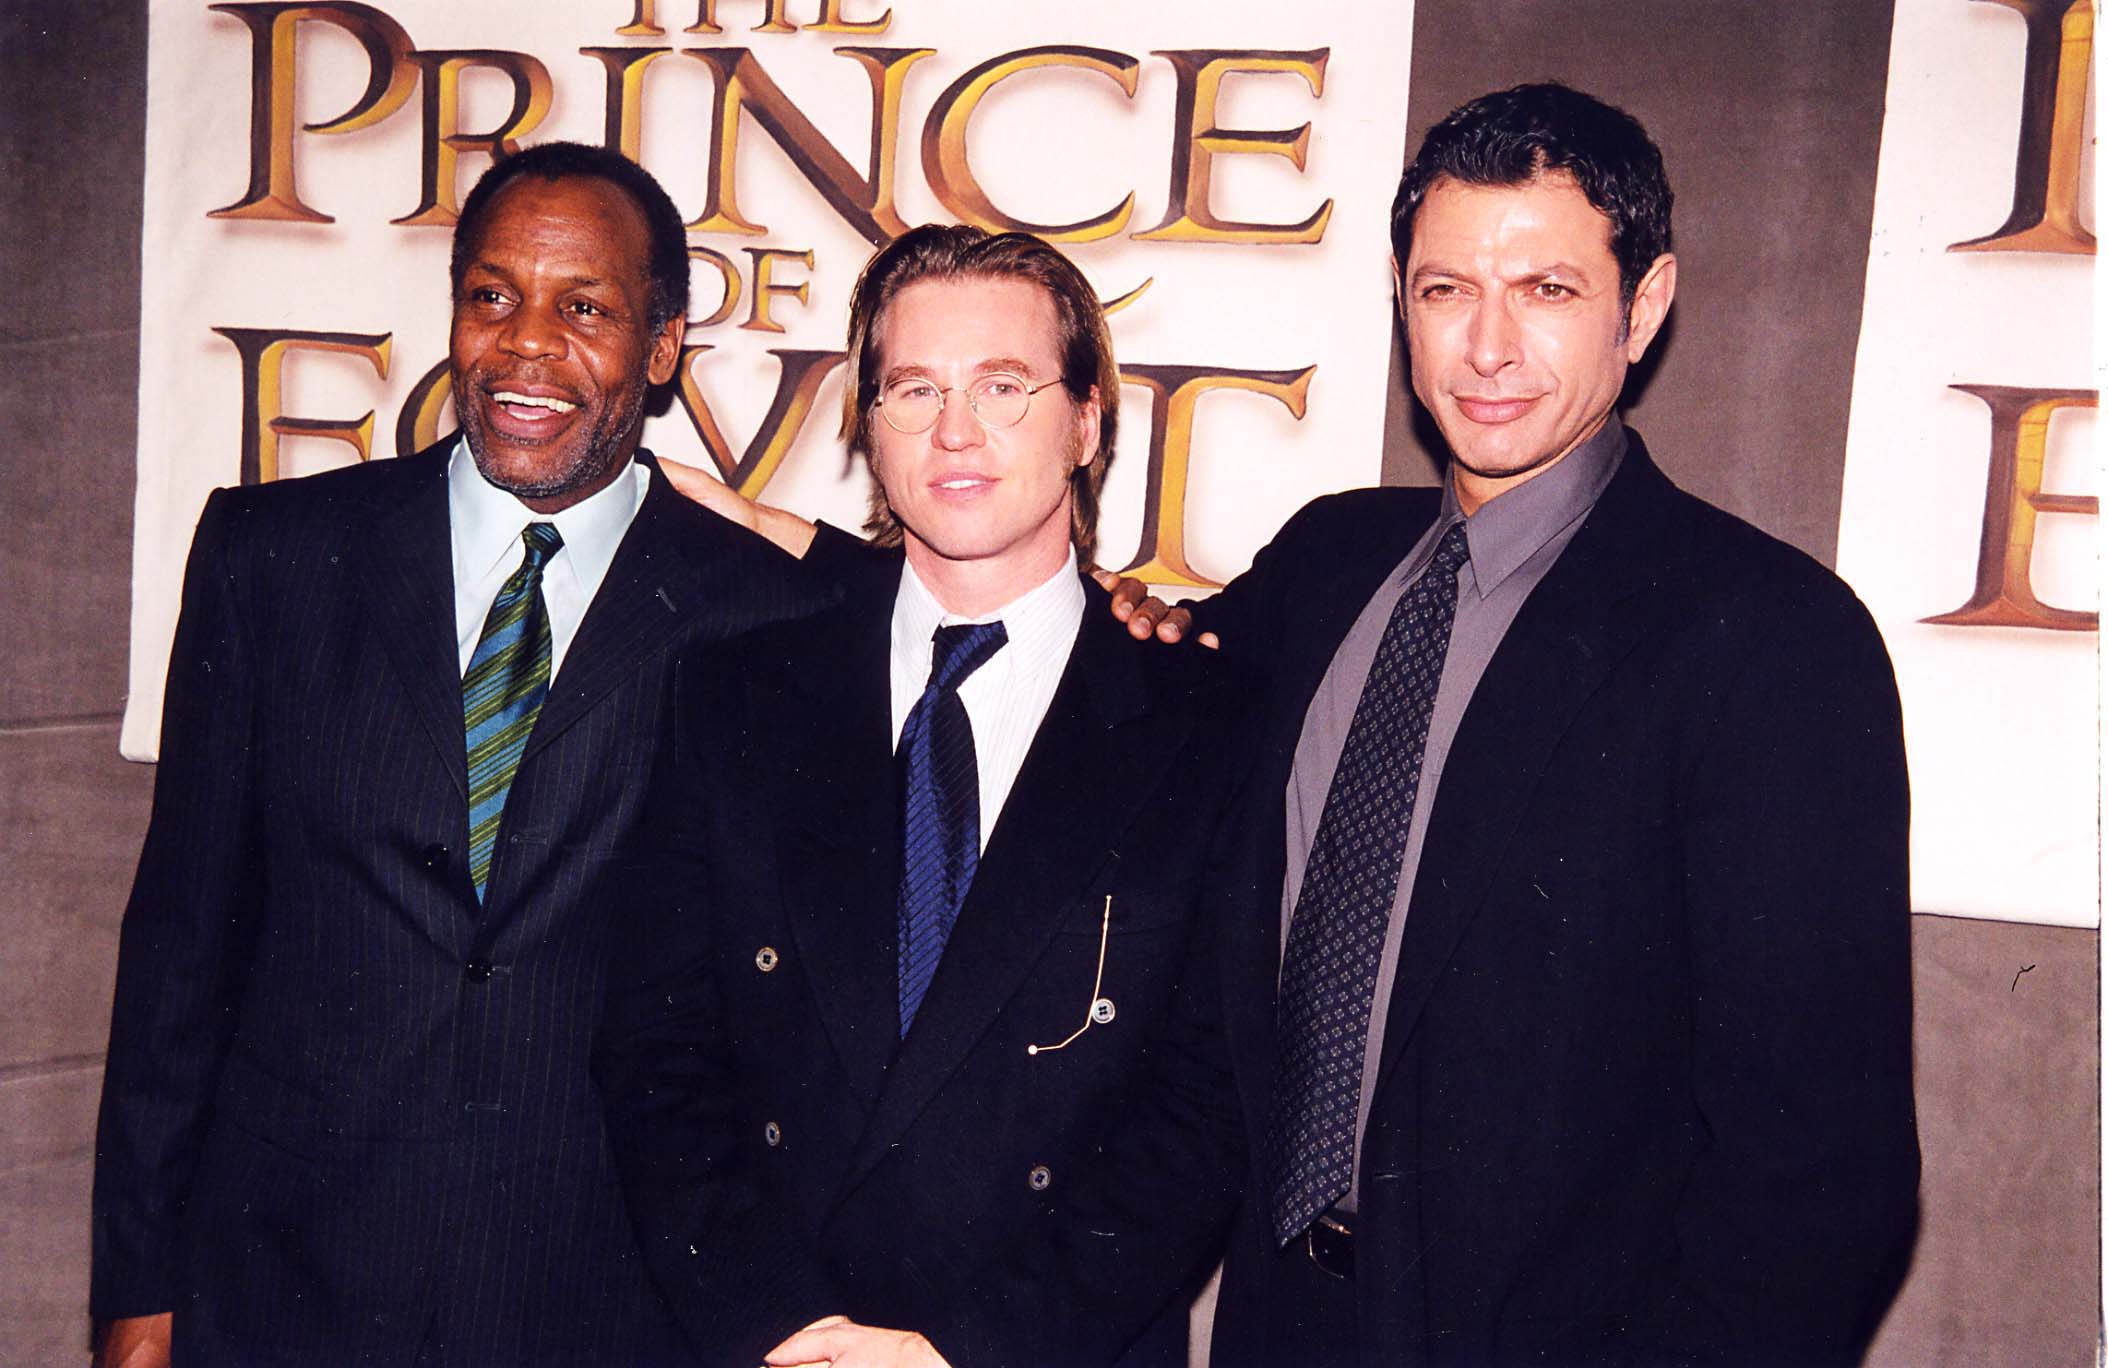 Danny Glover, Val Kilmer, and Jeff Goldblum at the 1998 premiere of 'The Prince of Egypt'